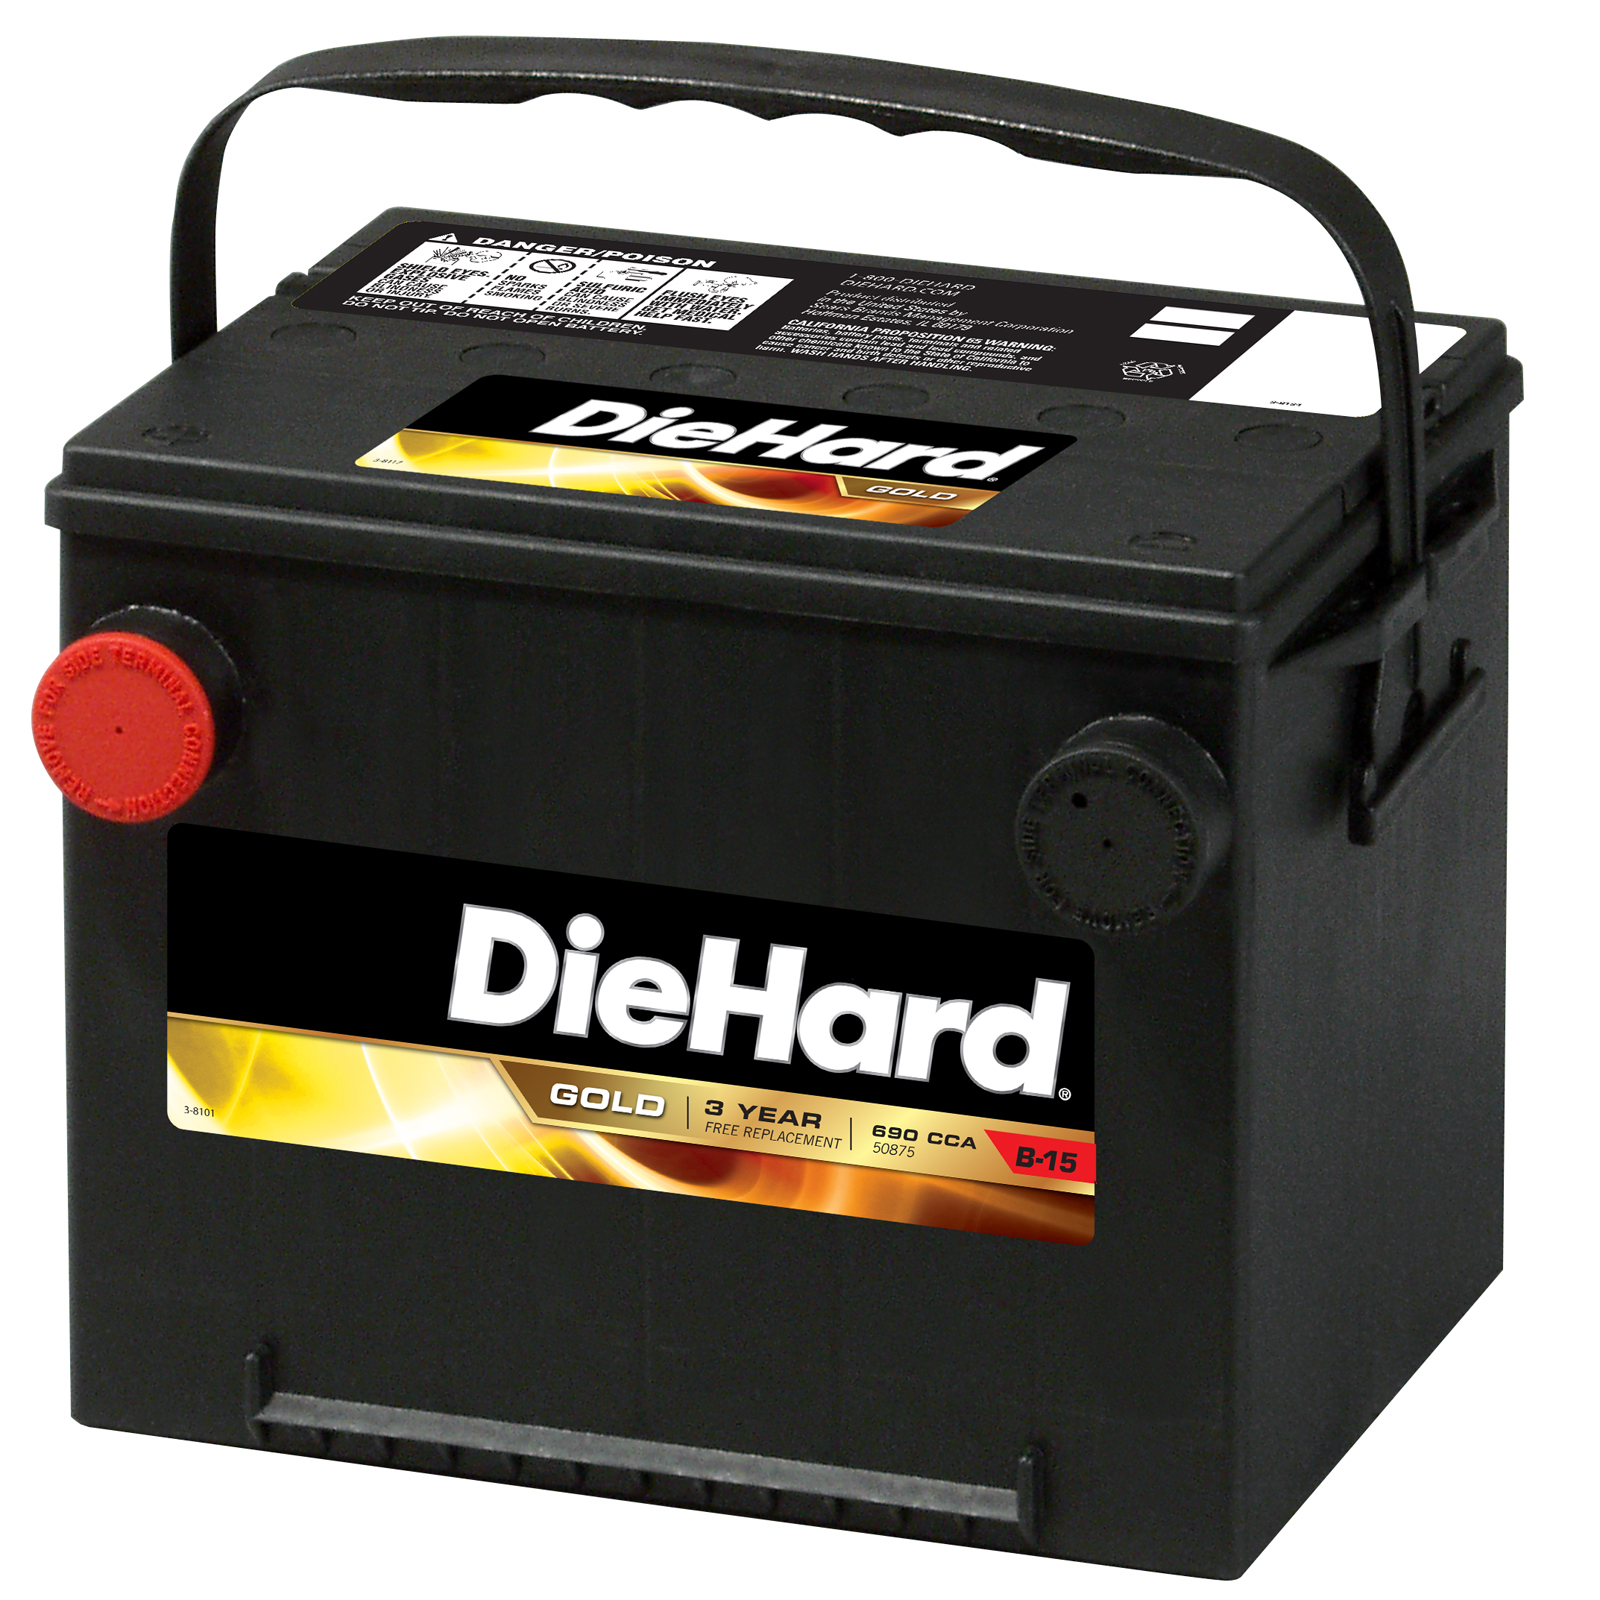 DieHard Gold Automotive Battery - Group Size EP-75 (Price with Exchange)